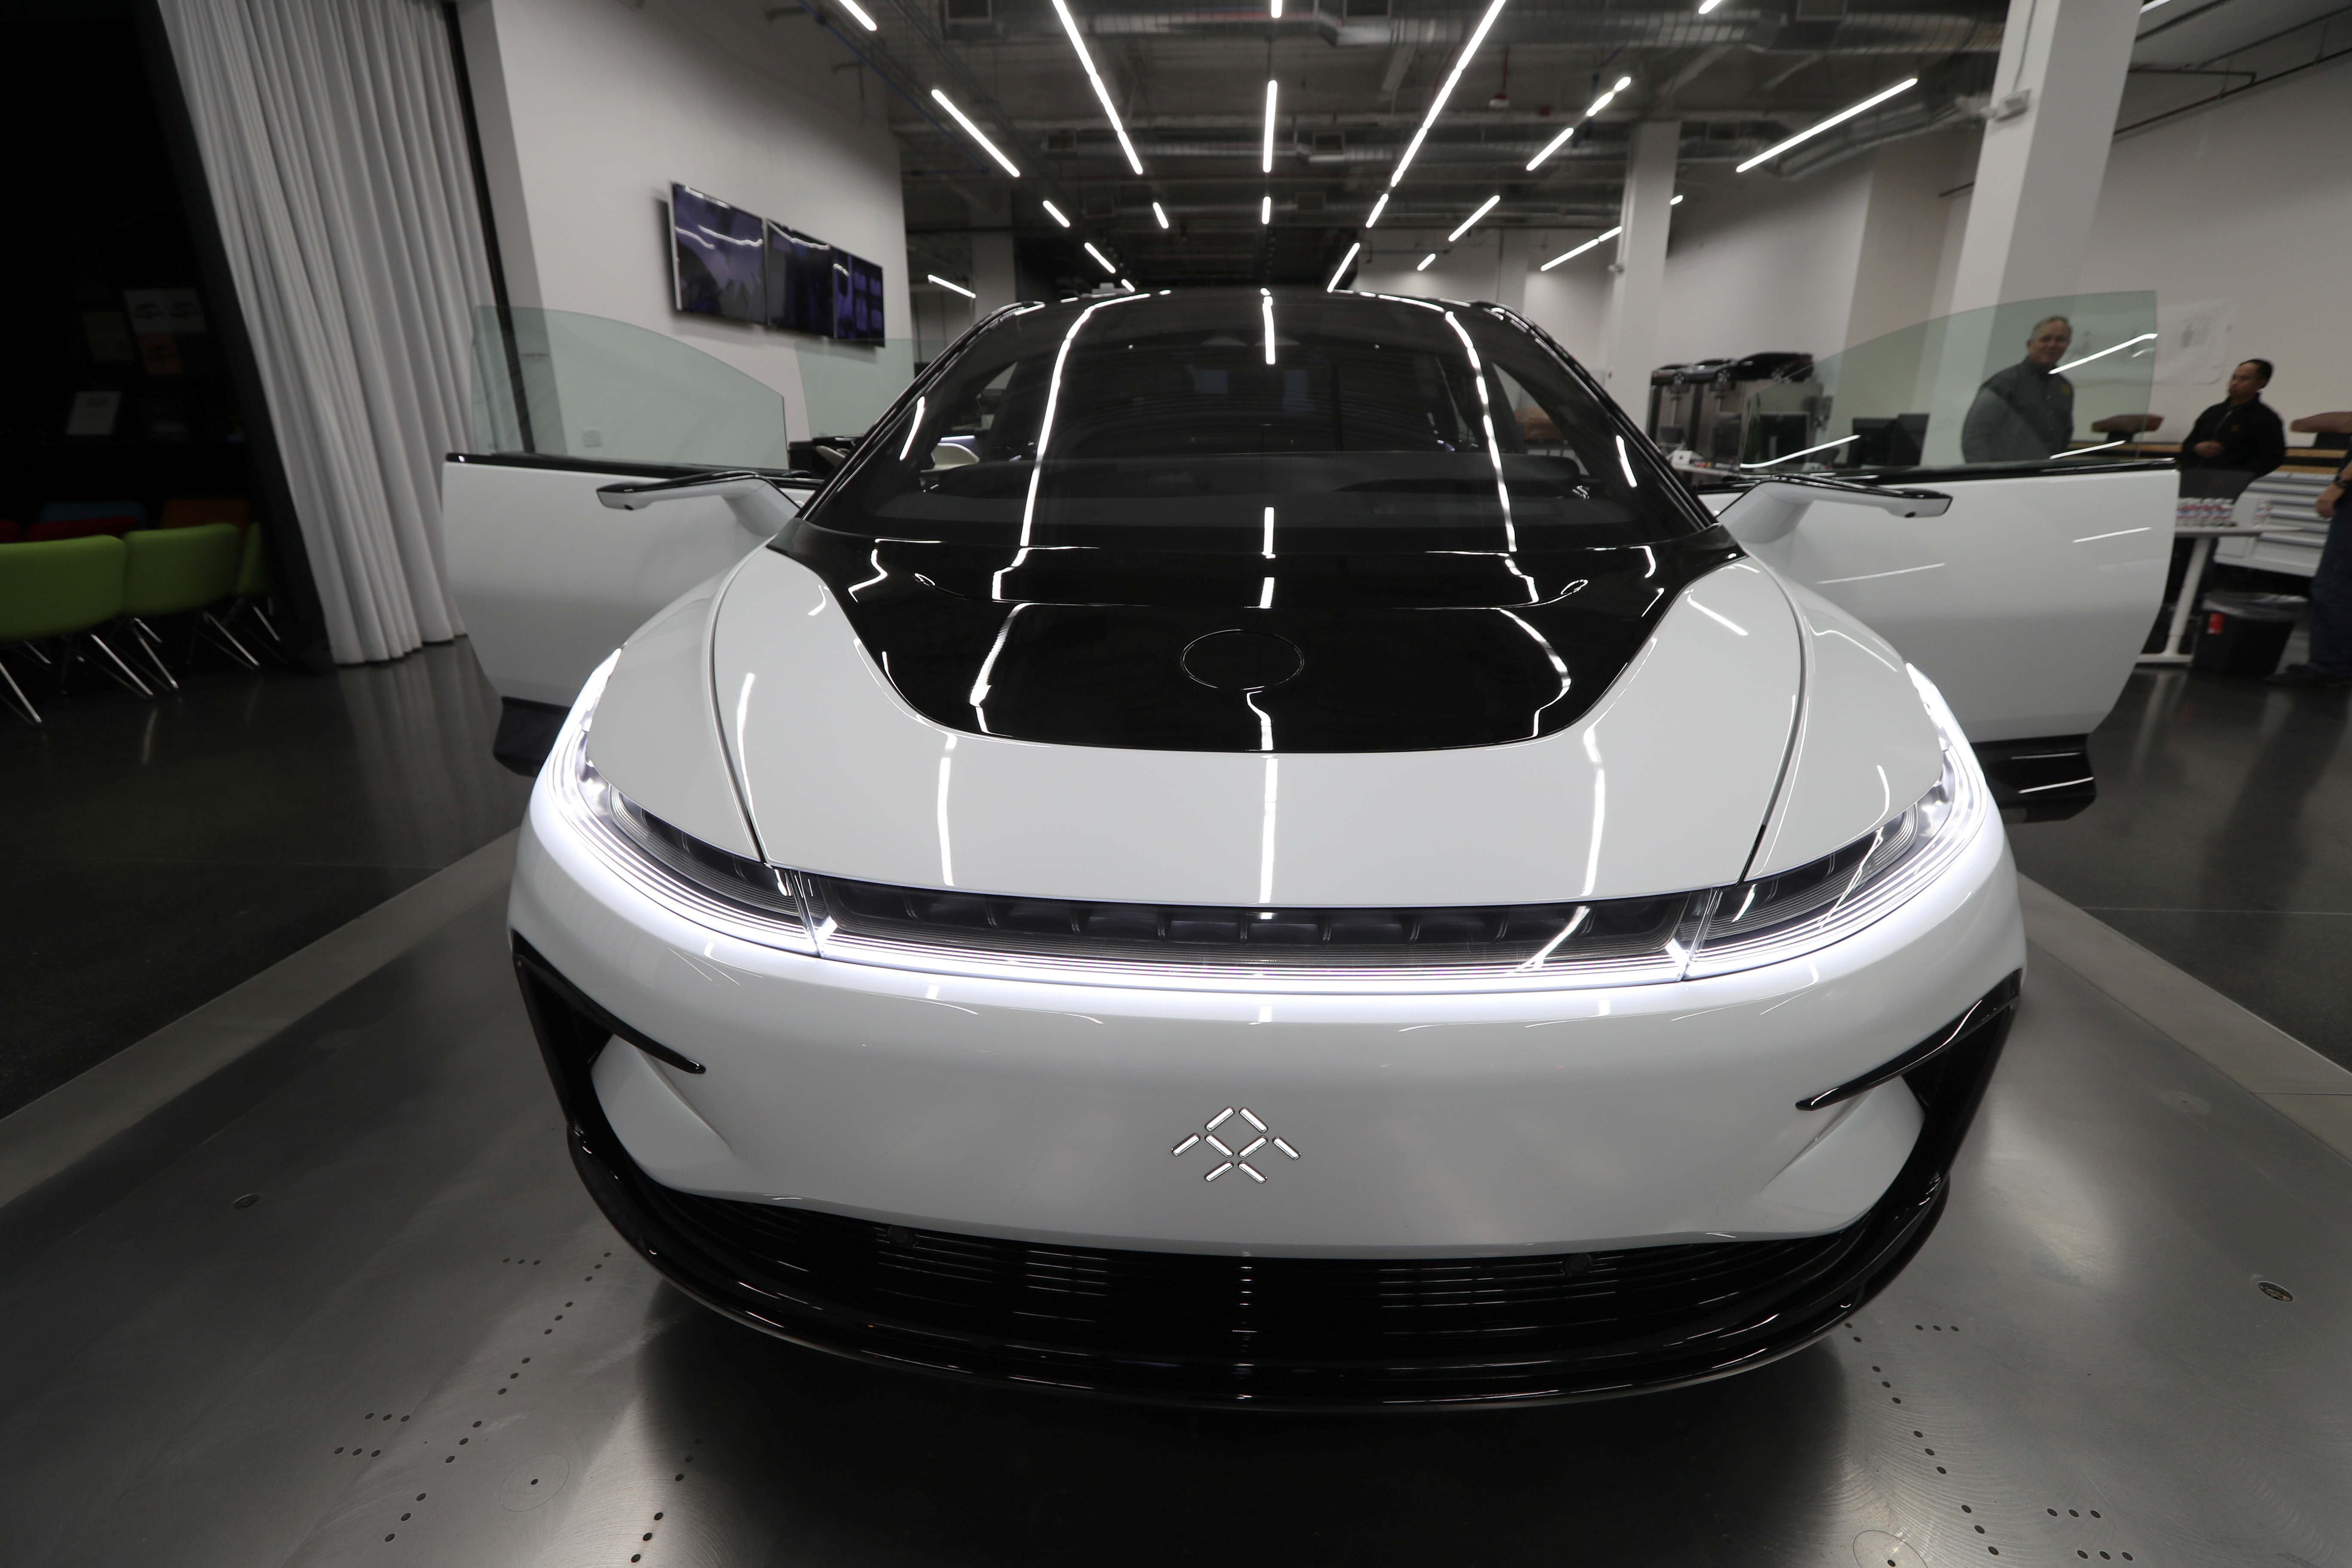 EV firm Faraday Future gearing up to go public in $3.4bn SPAC deal